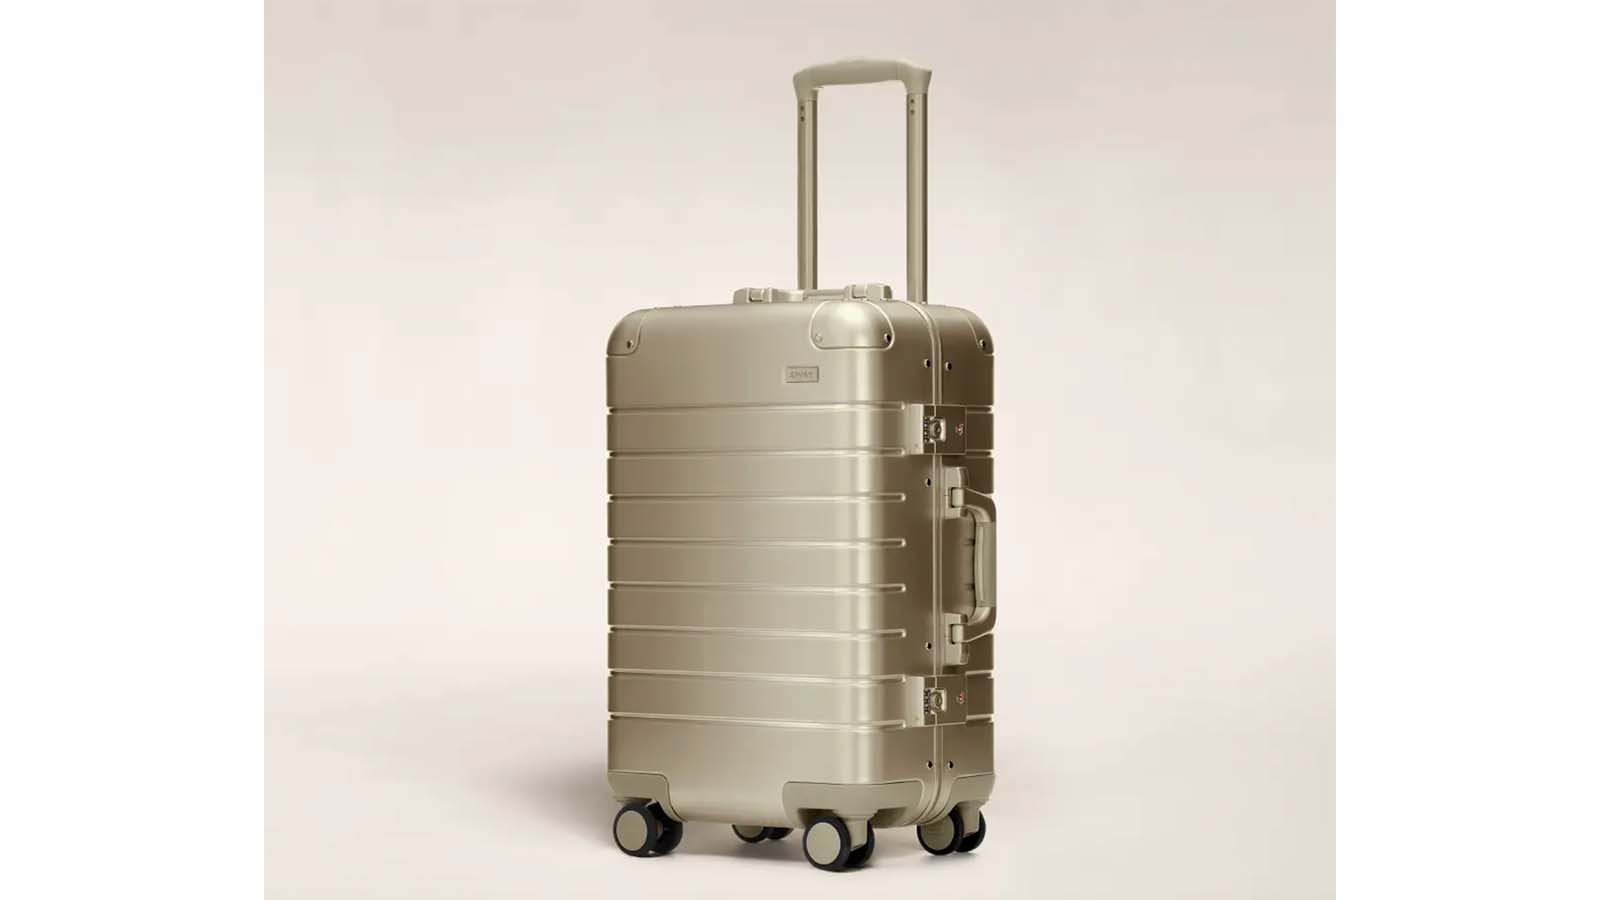 Away's popular luggage is hosting its first-ever online sale